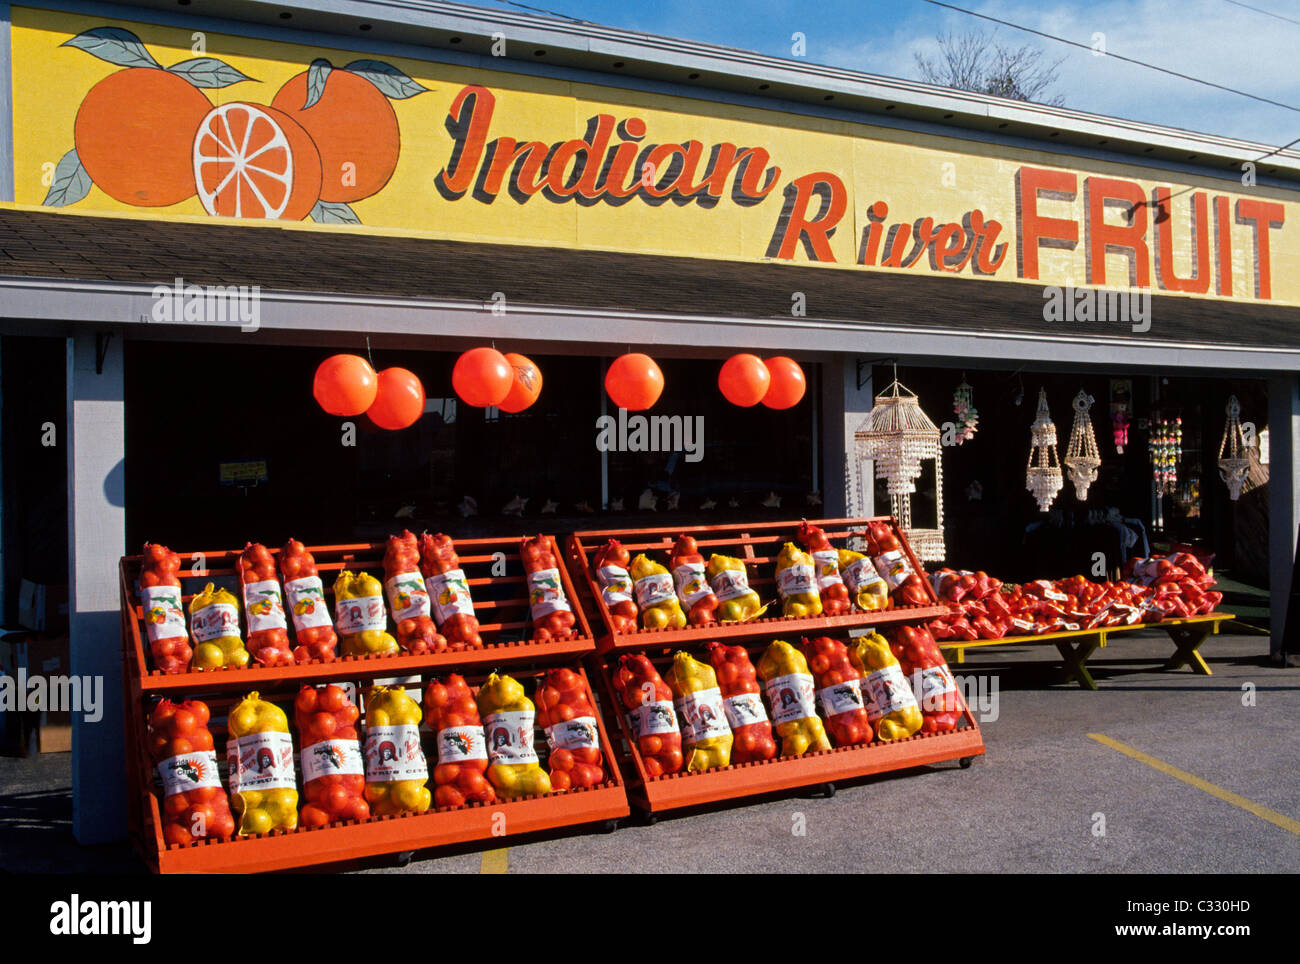 Indian river fruit stand hires stock photography and images Alamy